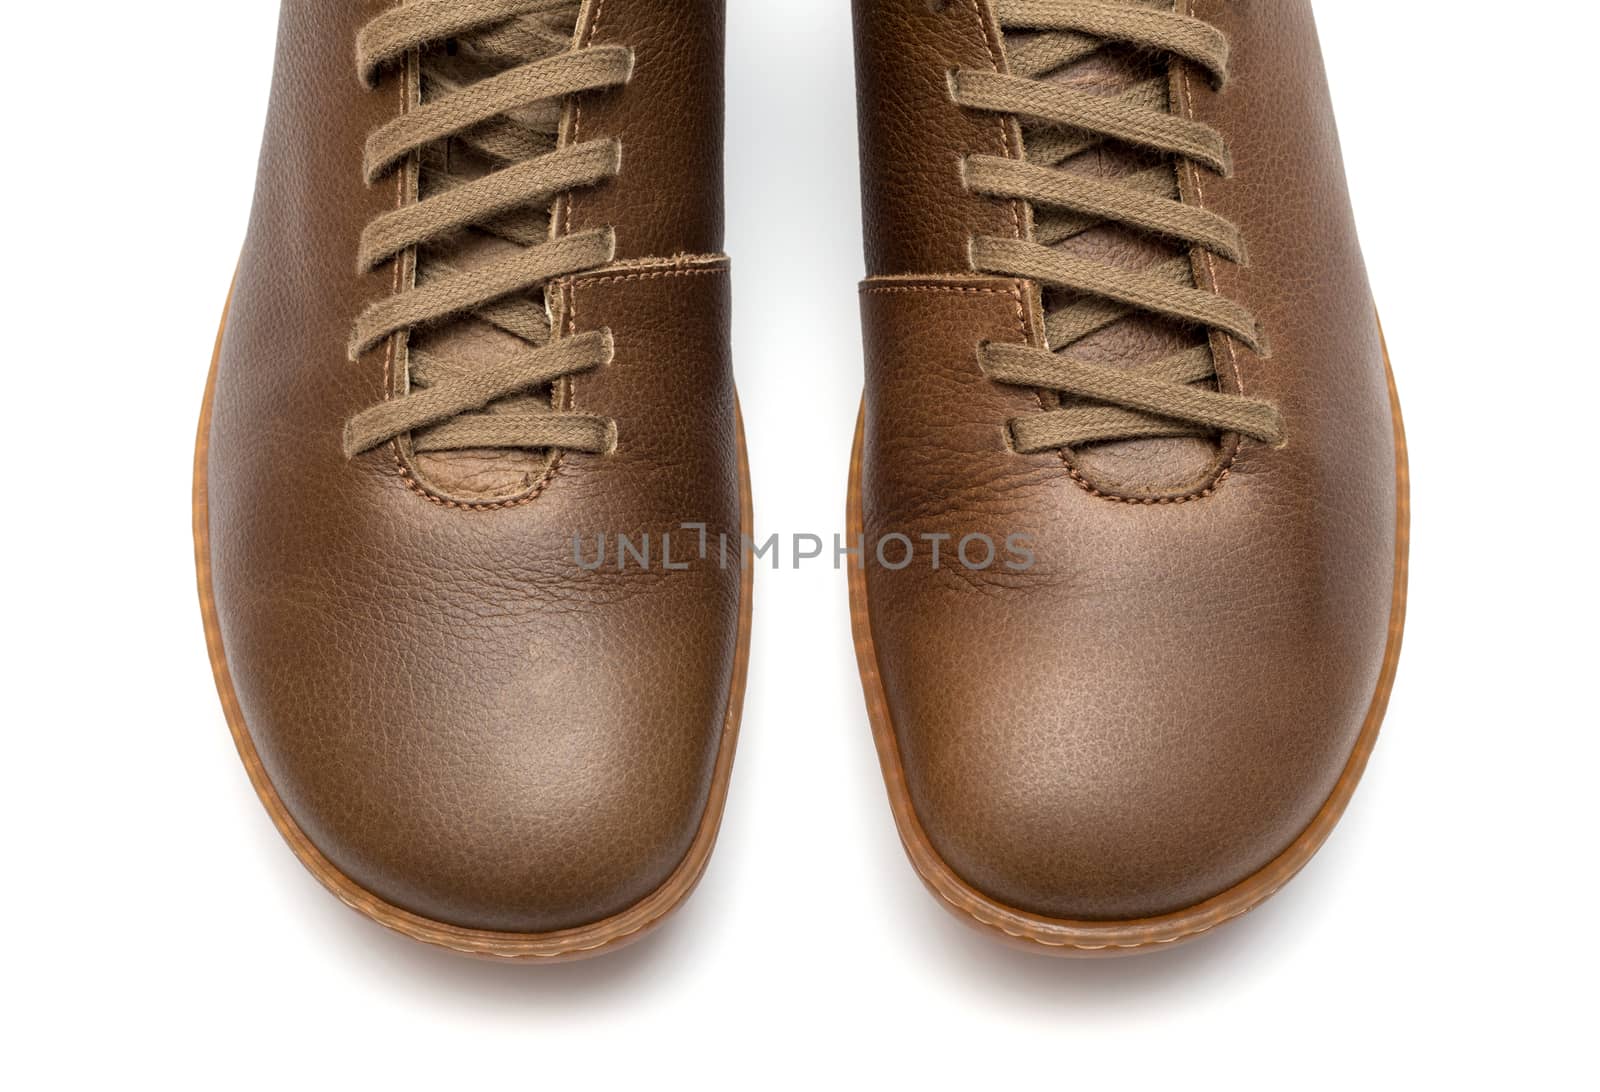 Brown Leather Men Shoes isolated on white background by DNKSTUDIO